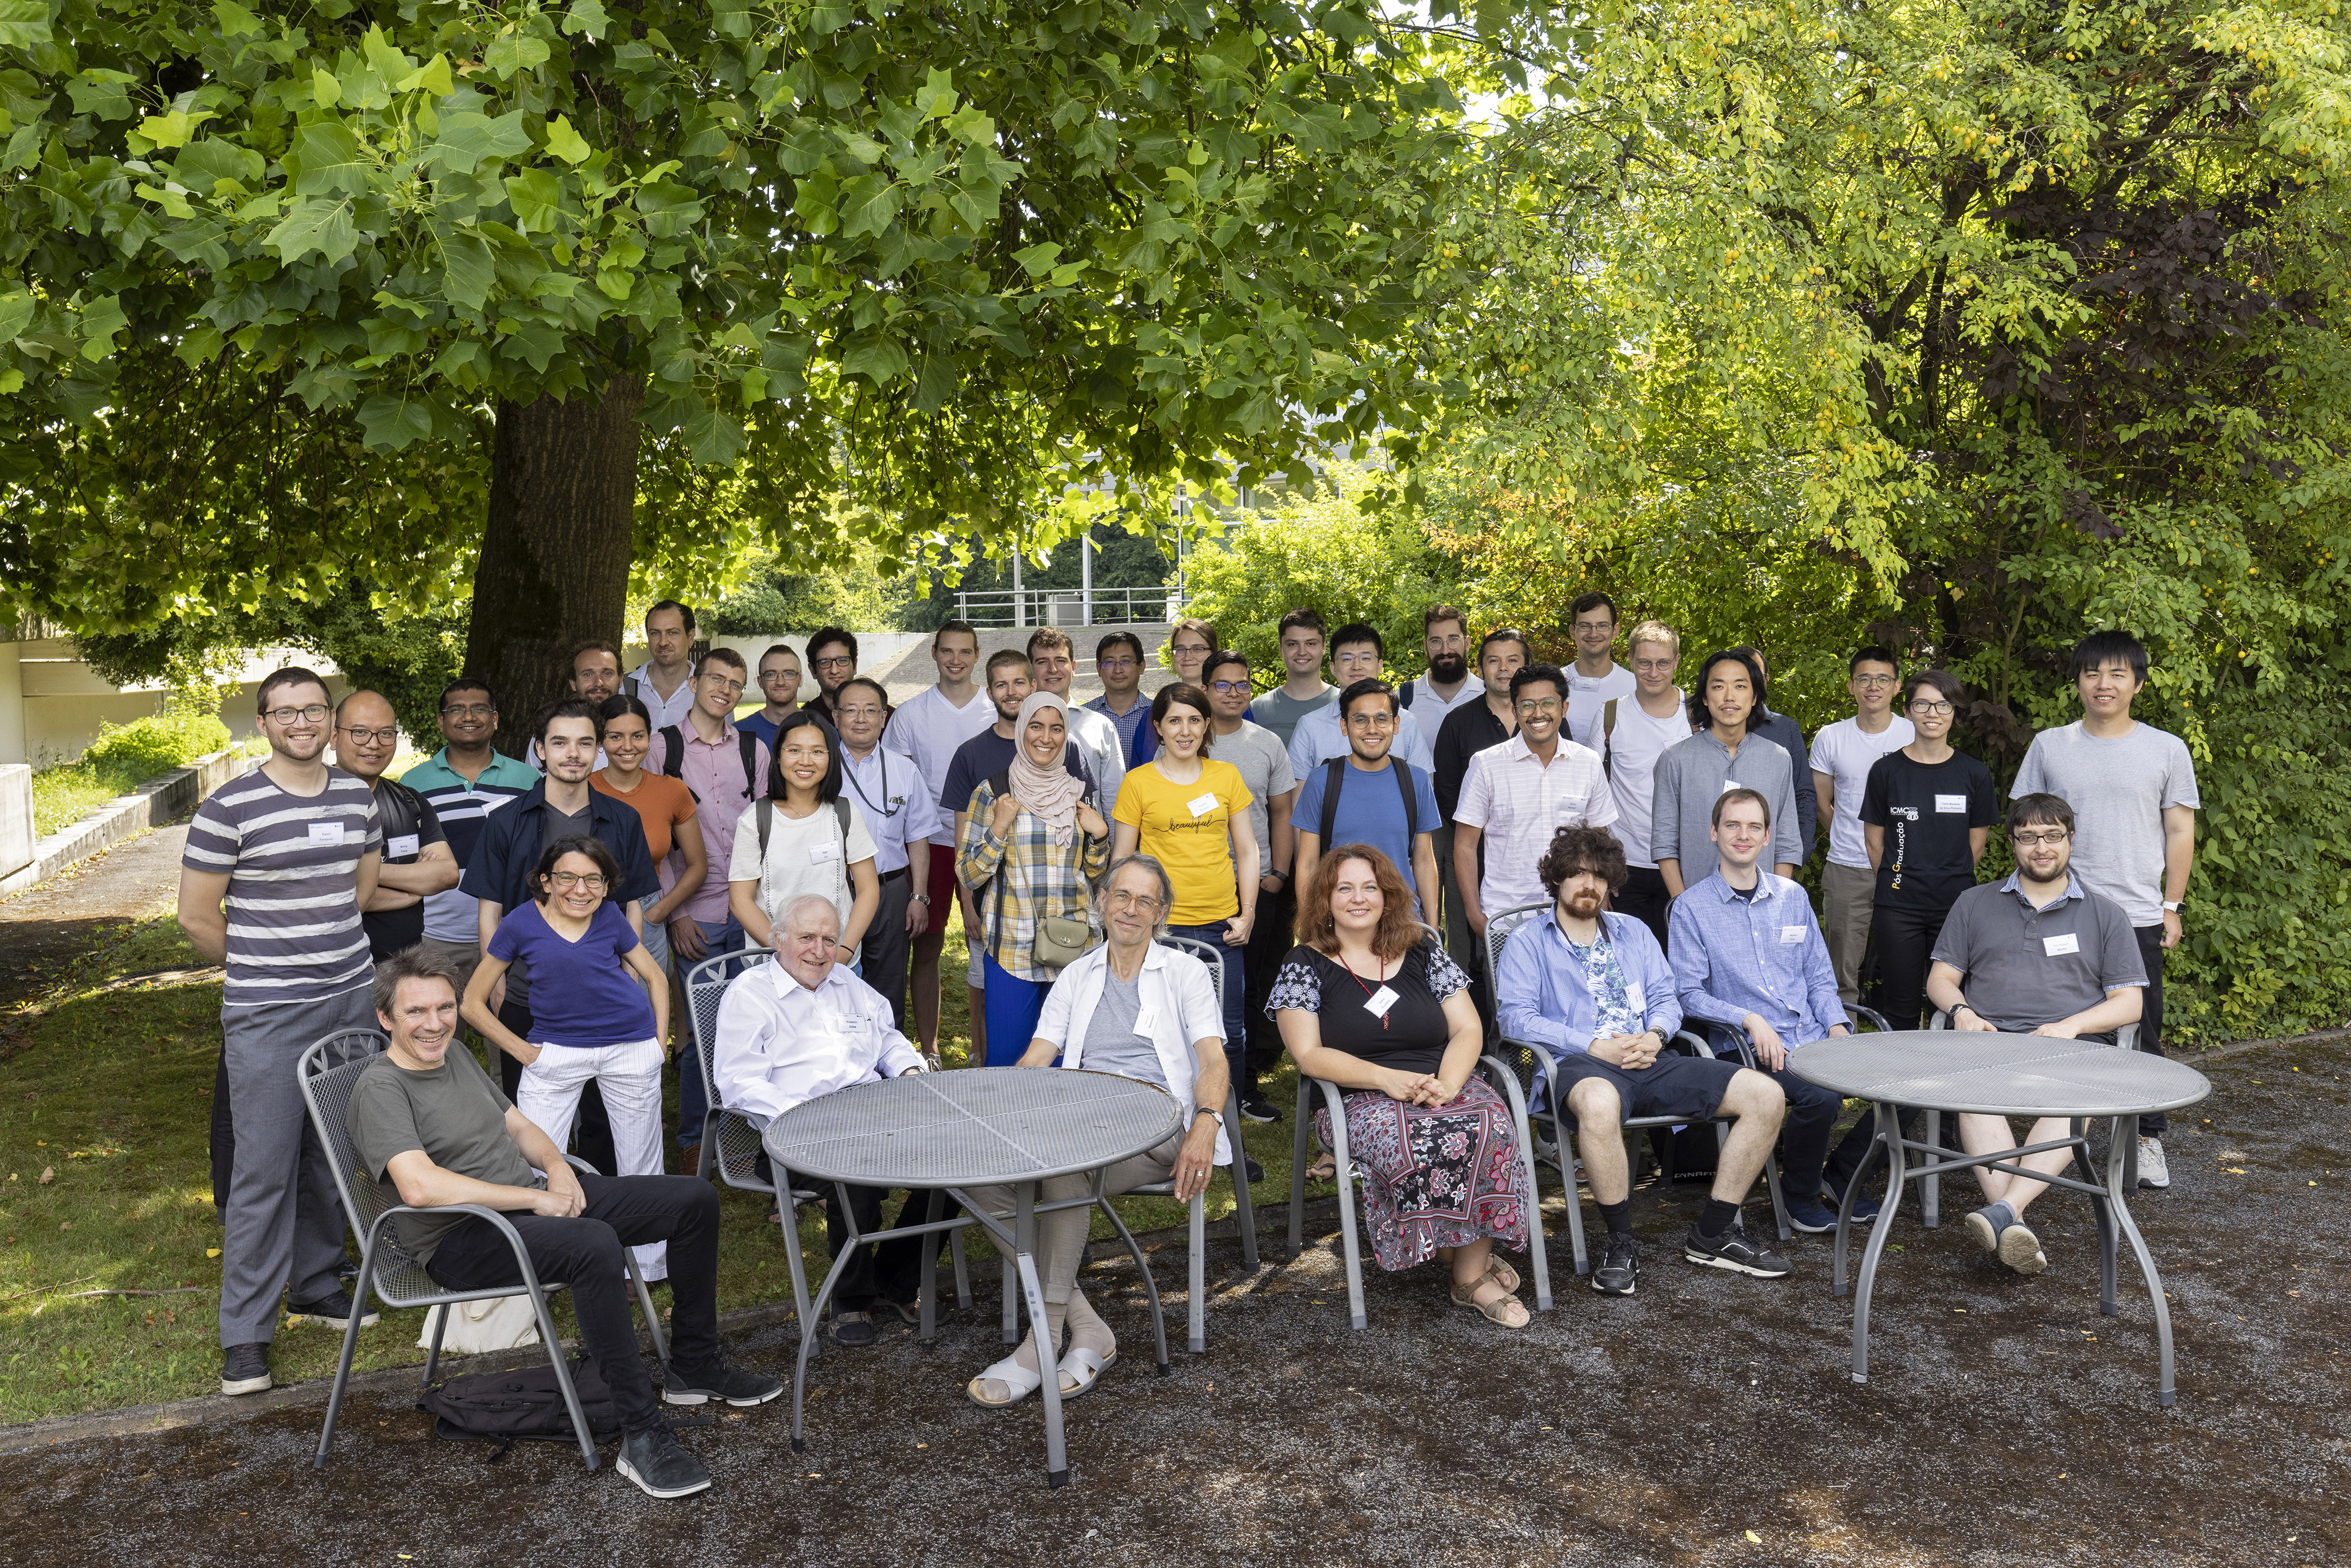 Group picture from a Summer School outside in ZiF's garden in front of trees